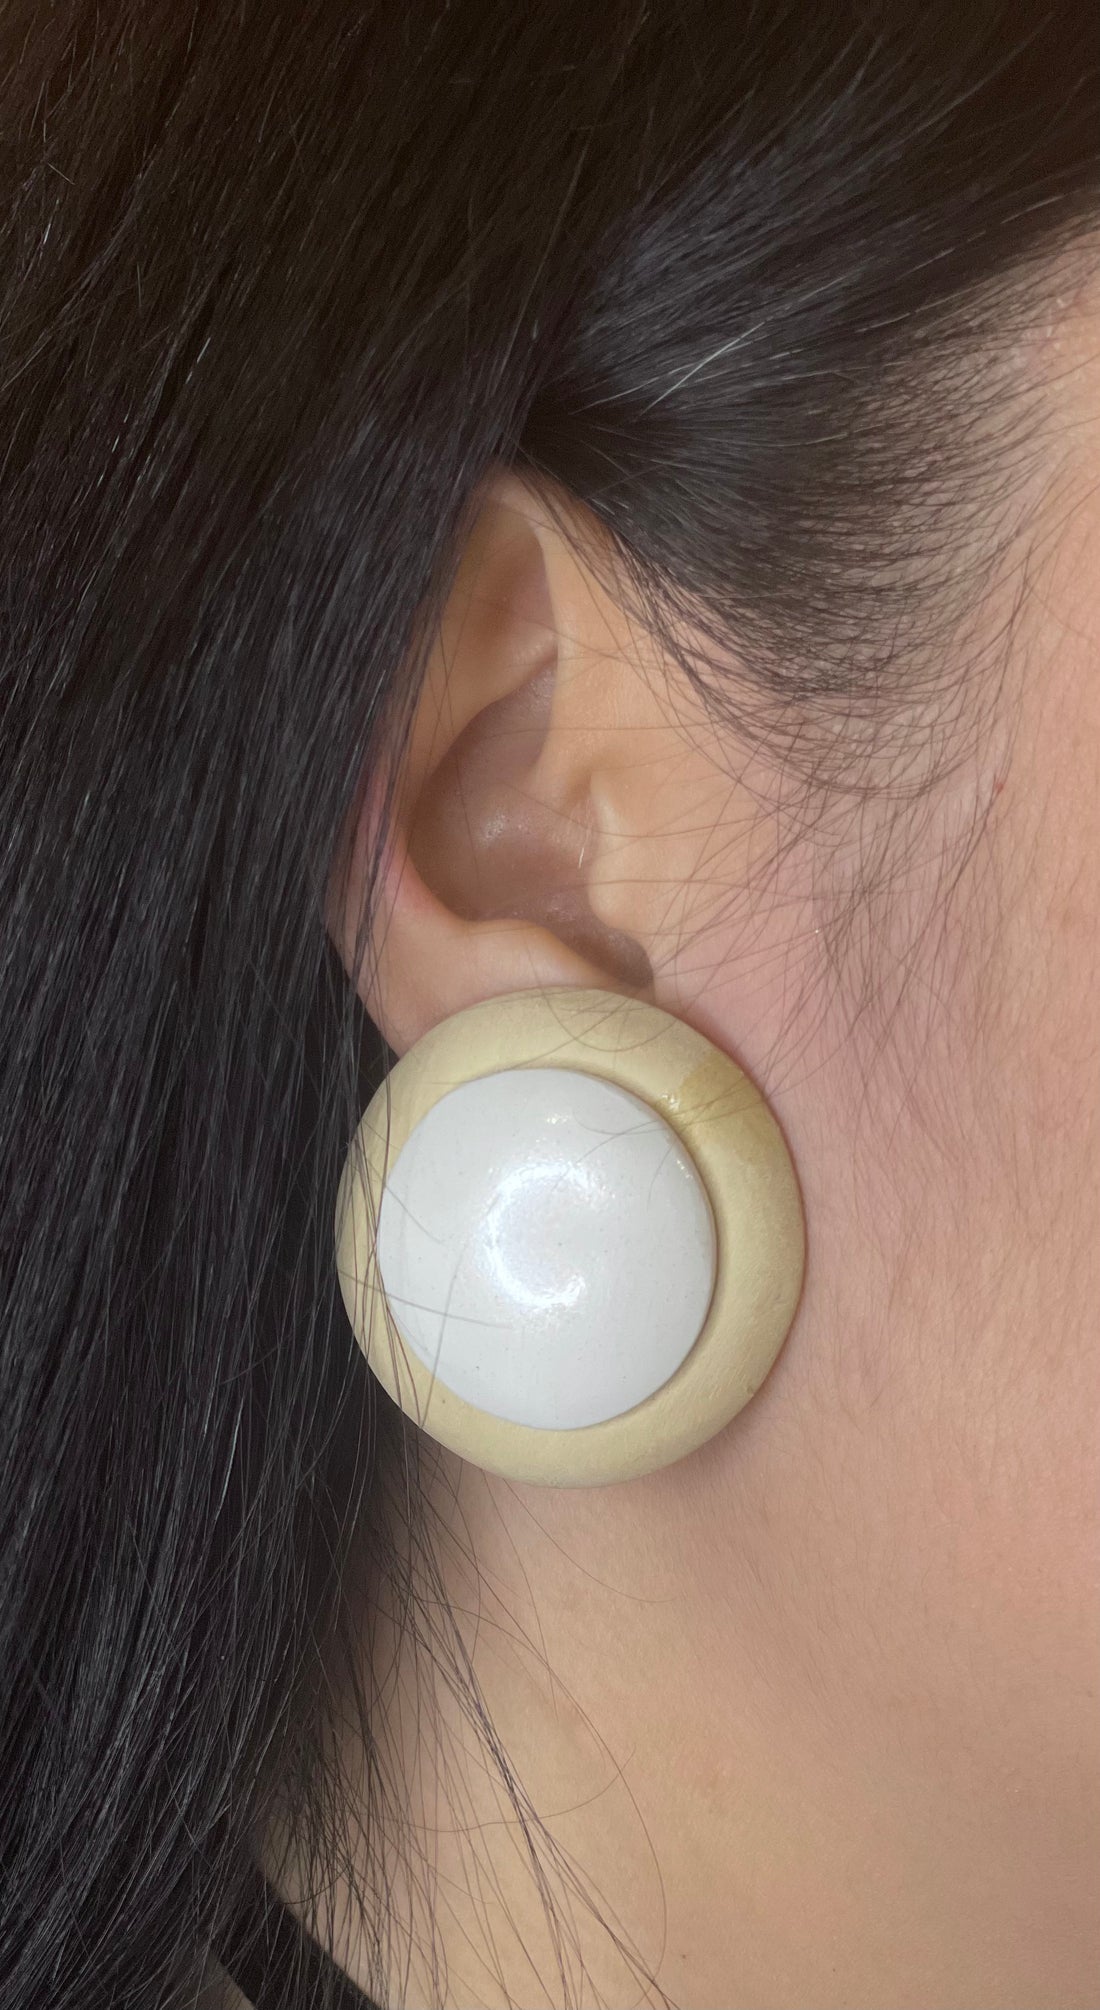 Vintage Oversized Tan and White Circular Clip-On Earrings